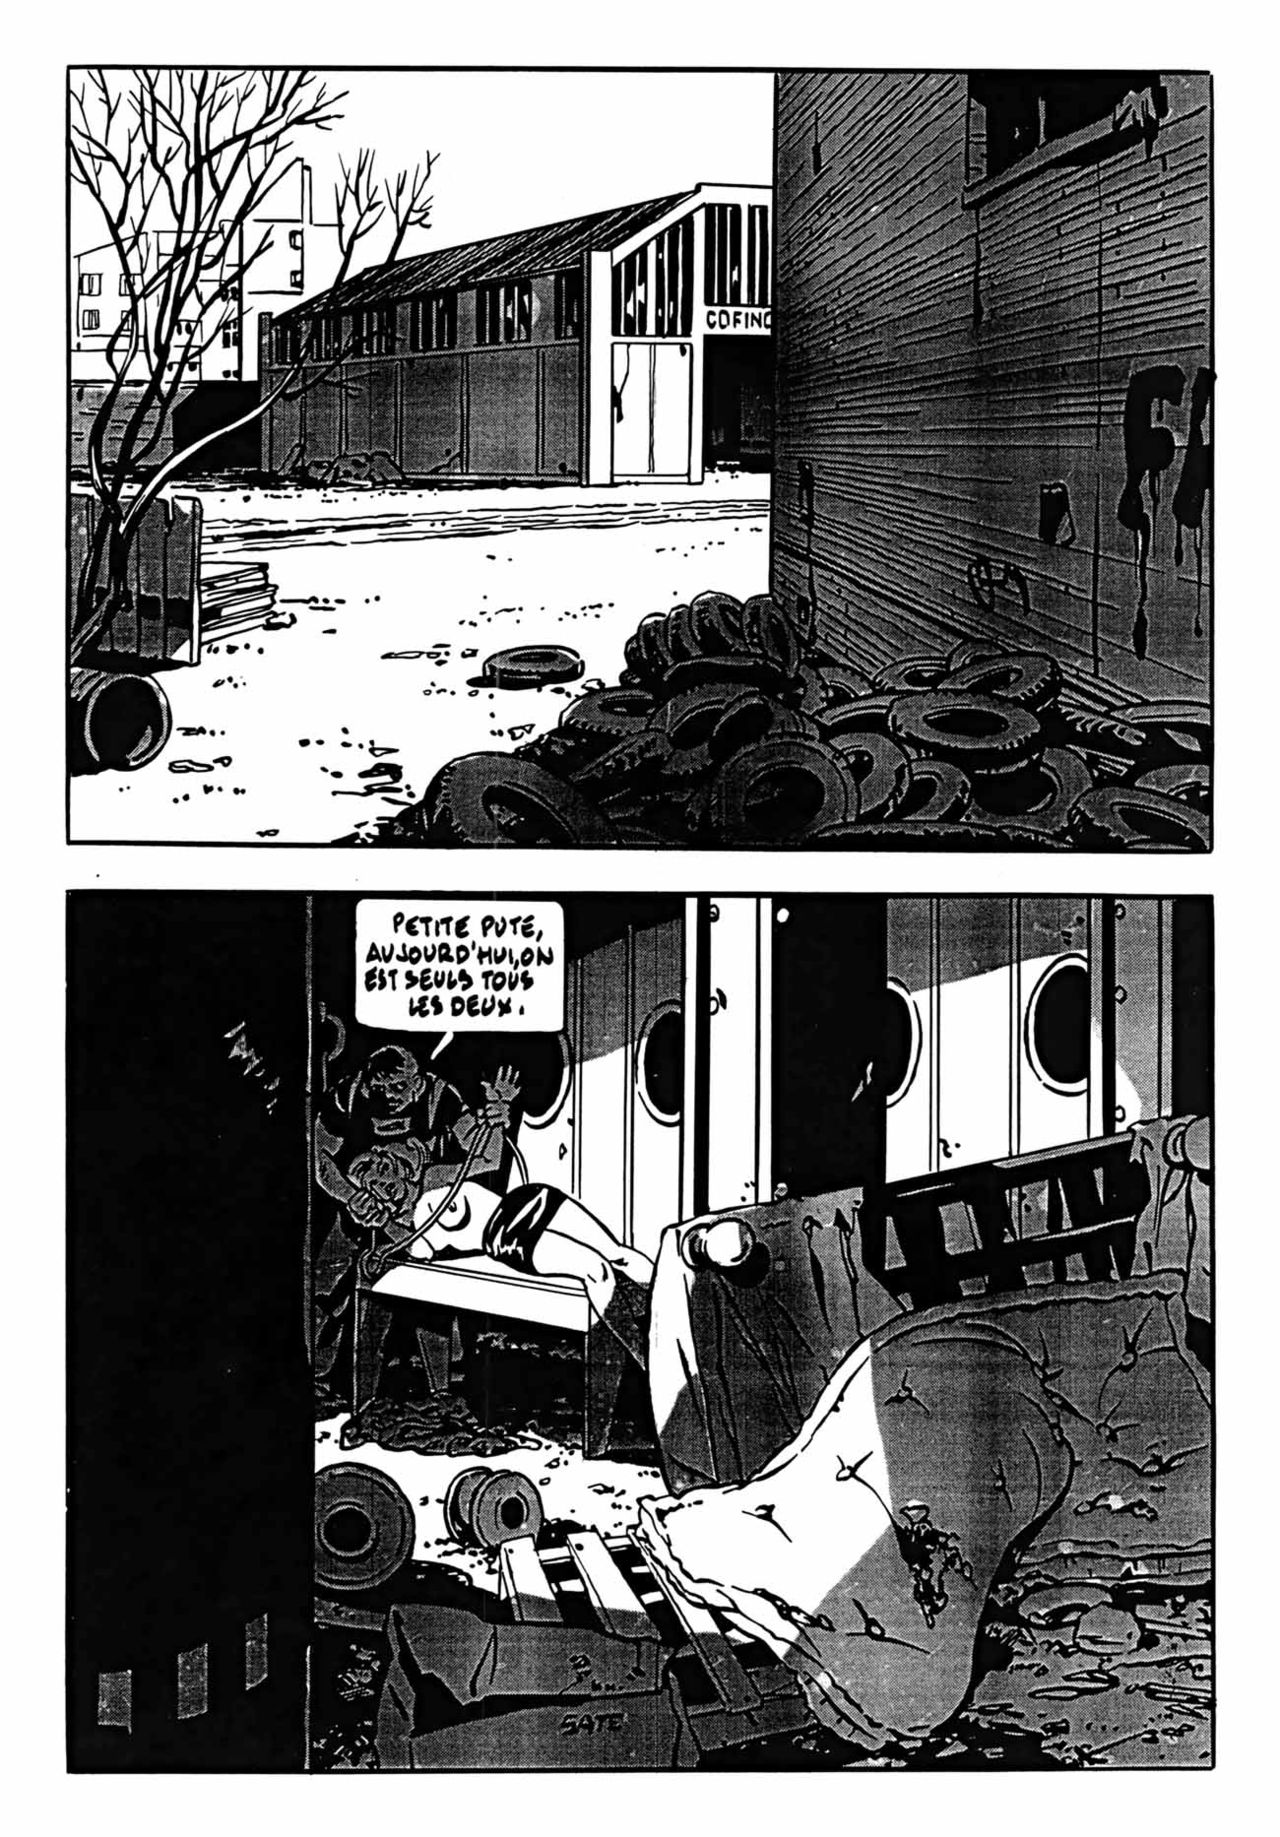 Police By Night - Volume 1 numero d'image 103